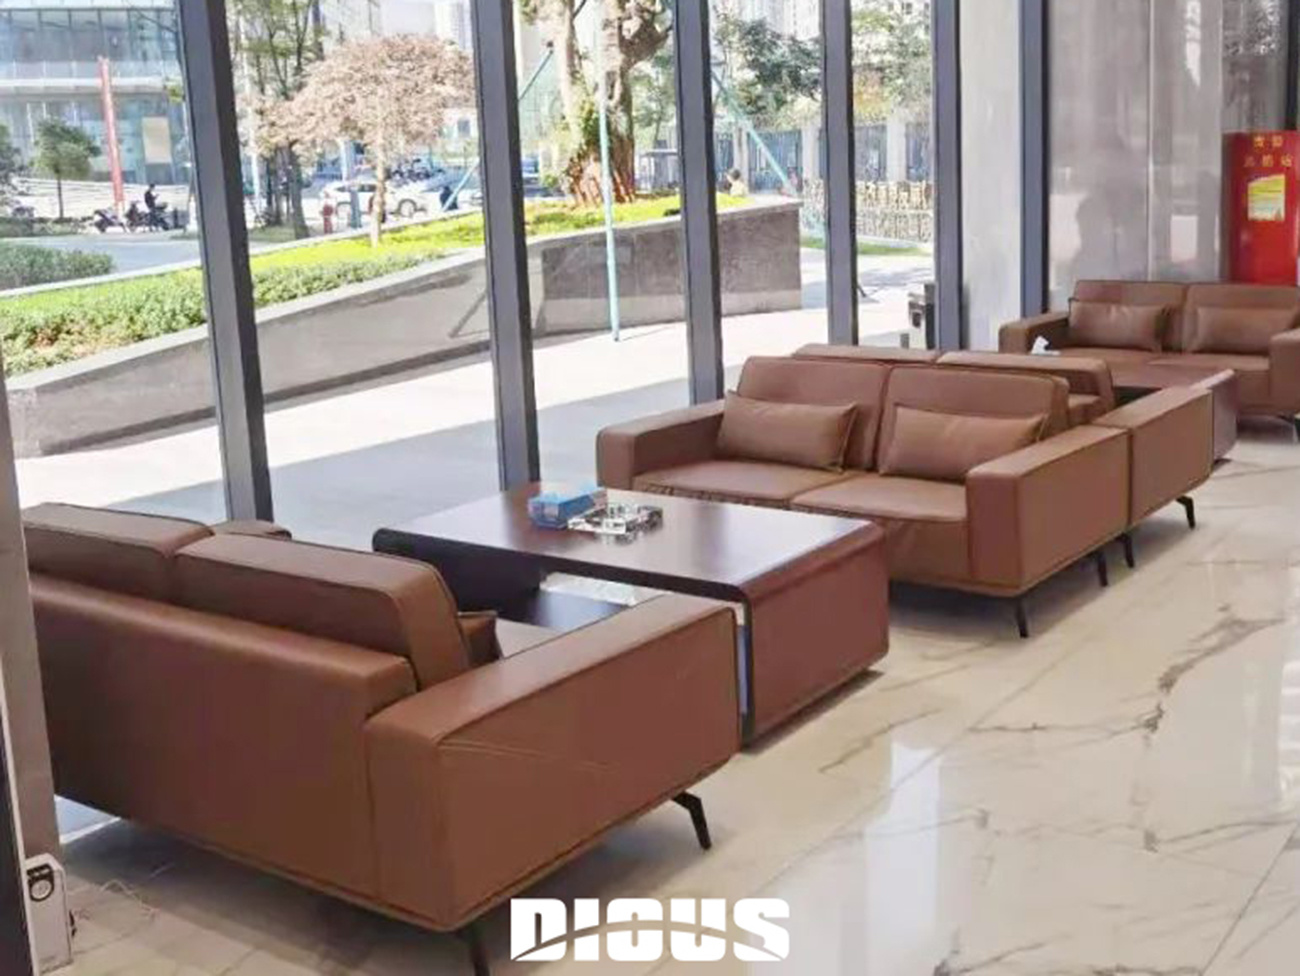 dious project - lobby reception area